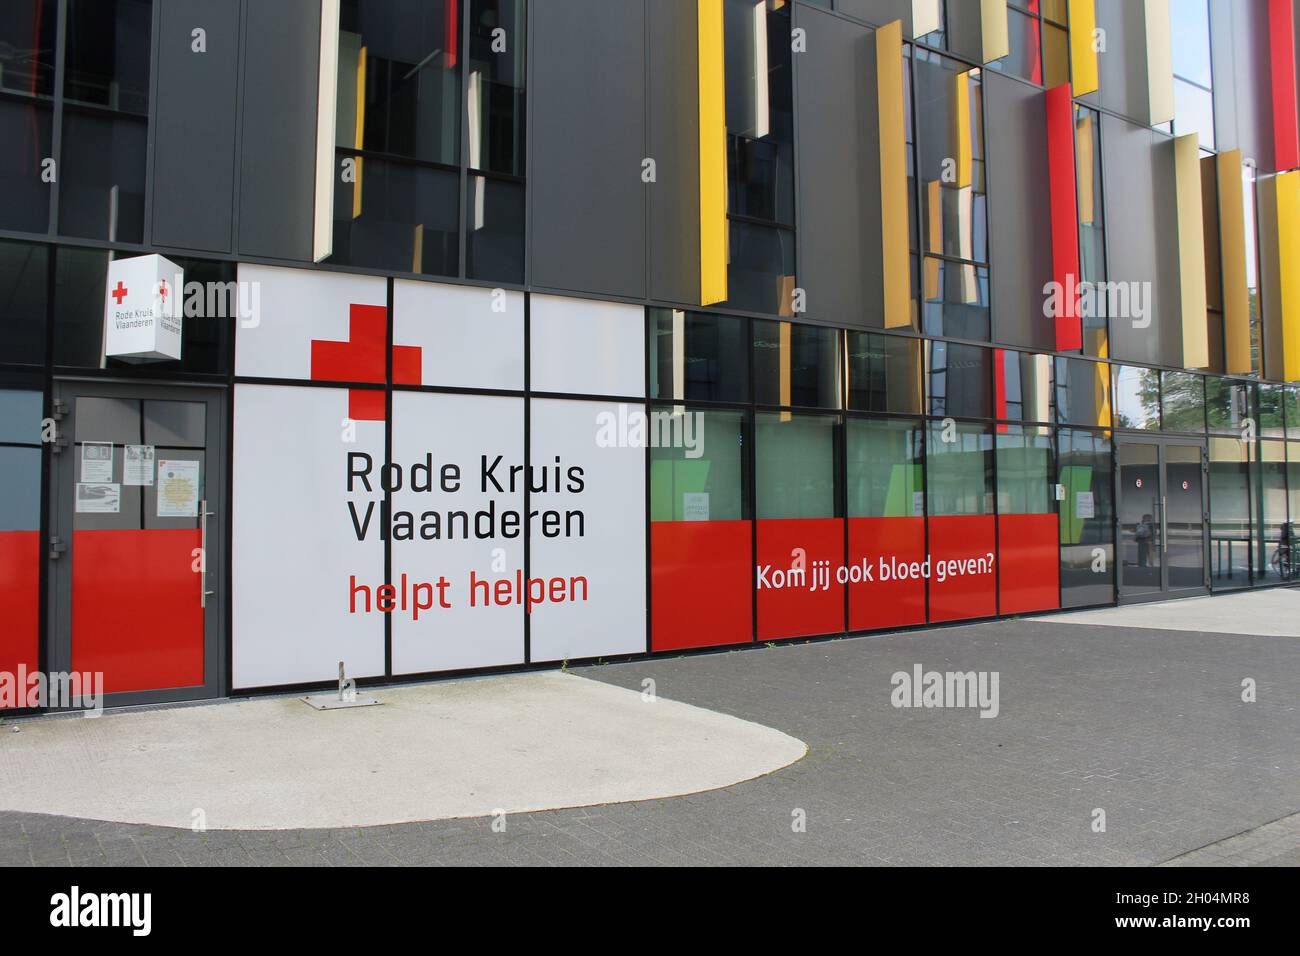 AALST, BELGIUM, 10 OCTOBER 2021: Exterior view of a Flemish Red Cross help center in Flanders. The Flemish Red Cross is a voluntary organisation and p Stock Photo